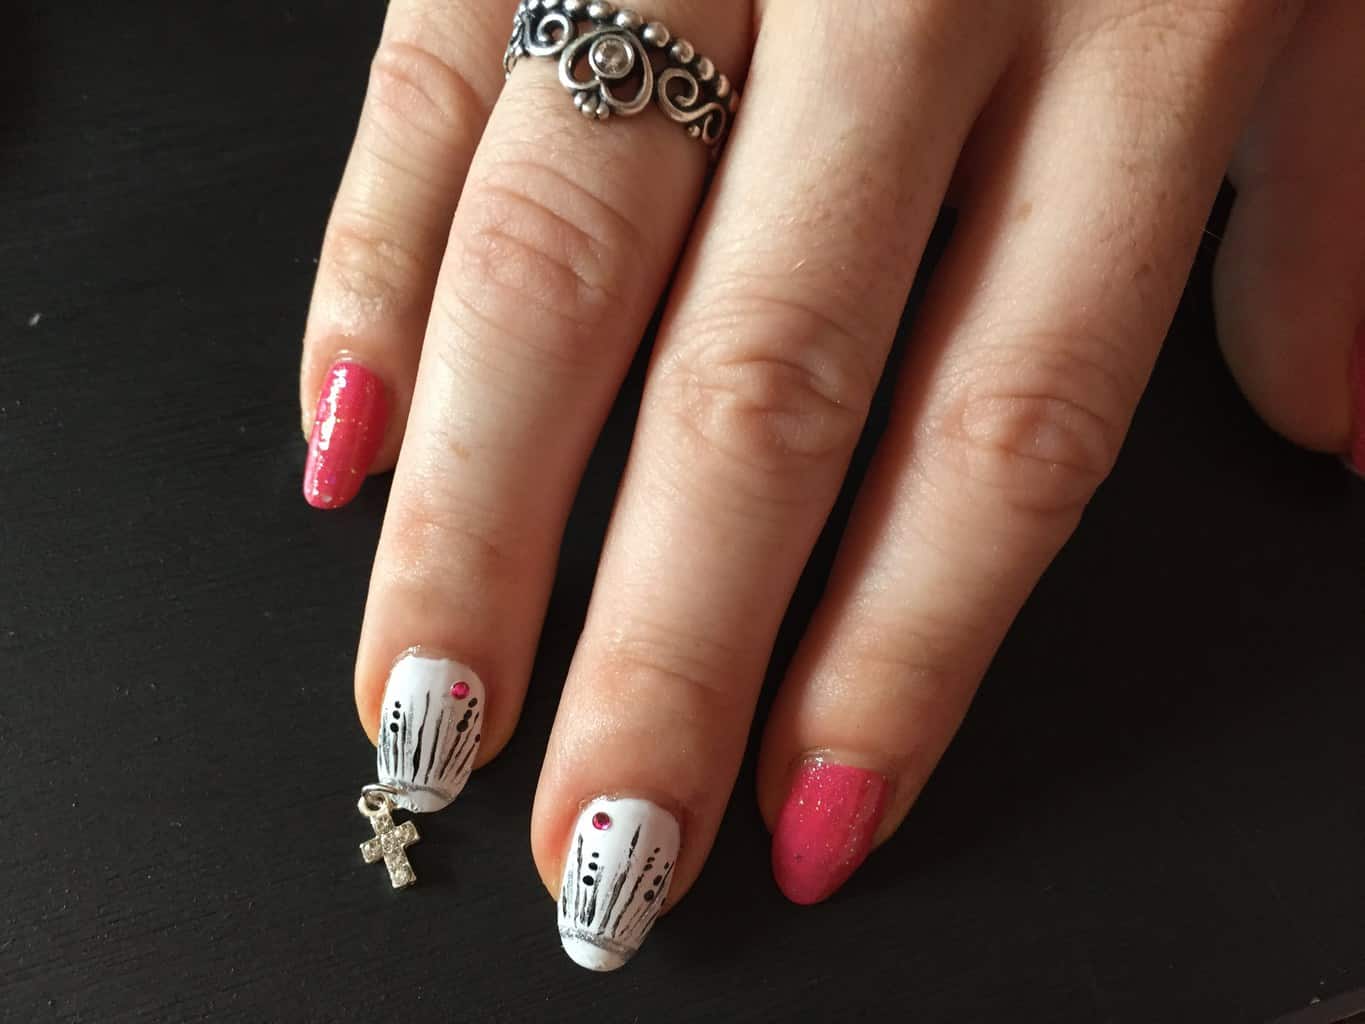 2. 10 Must-Have Nail Art Piercing Jewelry Designs - wide 5